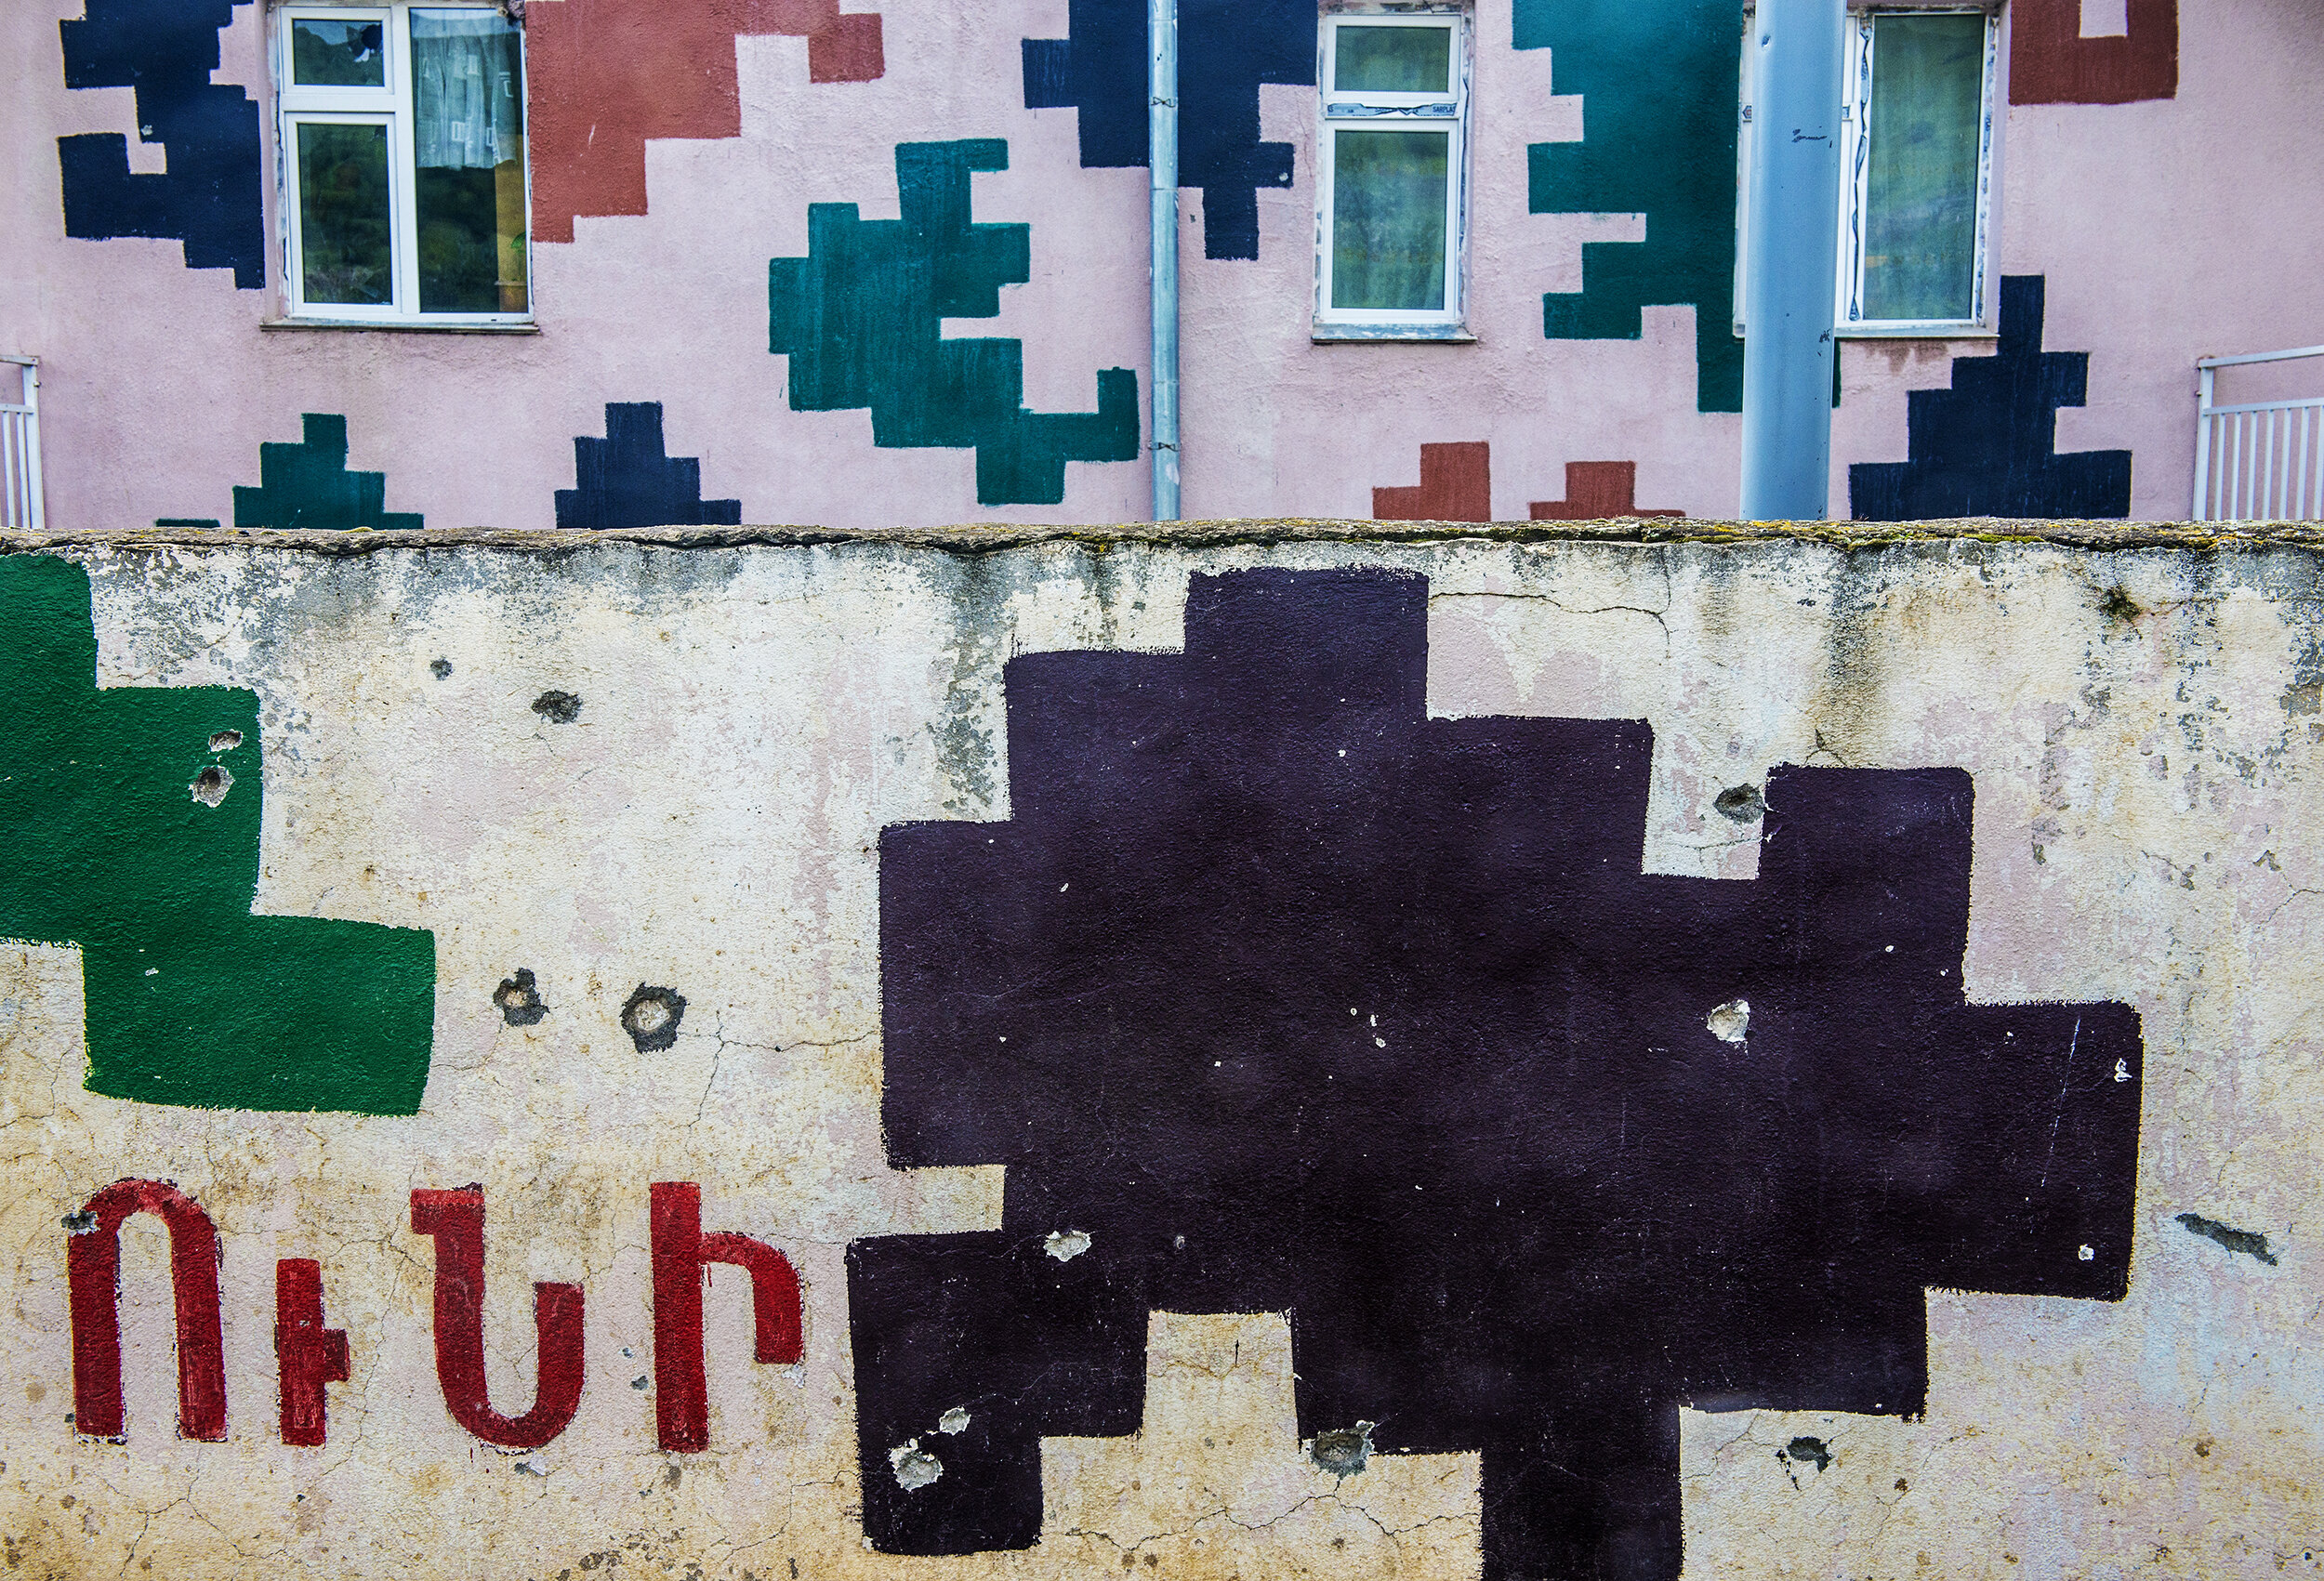  Buildings decorated in digital camouflage bear evidence of fighting in Mataghis, Nagorno-Karabakh.  During the Four-Day War, Azerbaijan tried unsuccessfully to capture the town of 400, located near a valuable hydroelectric plant.  Most of Mataghis’ 